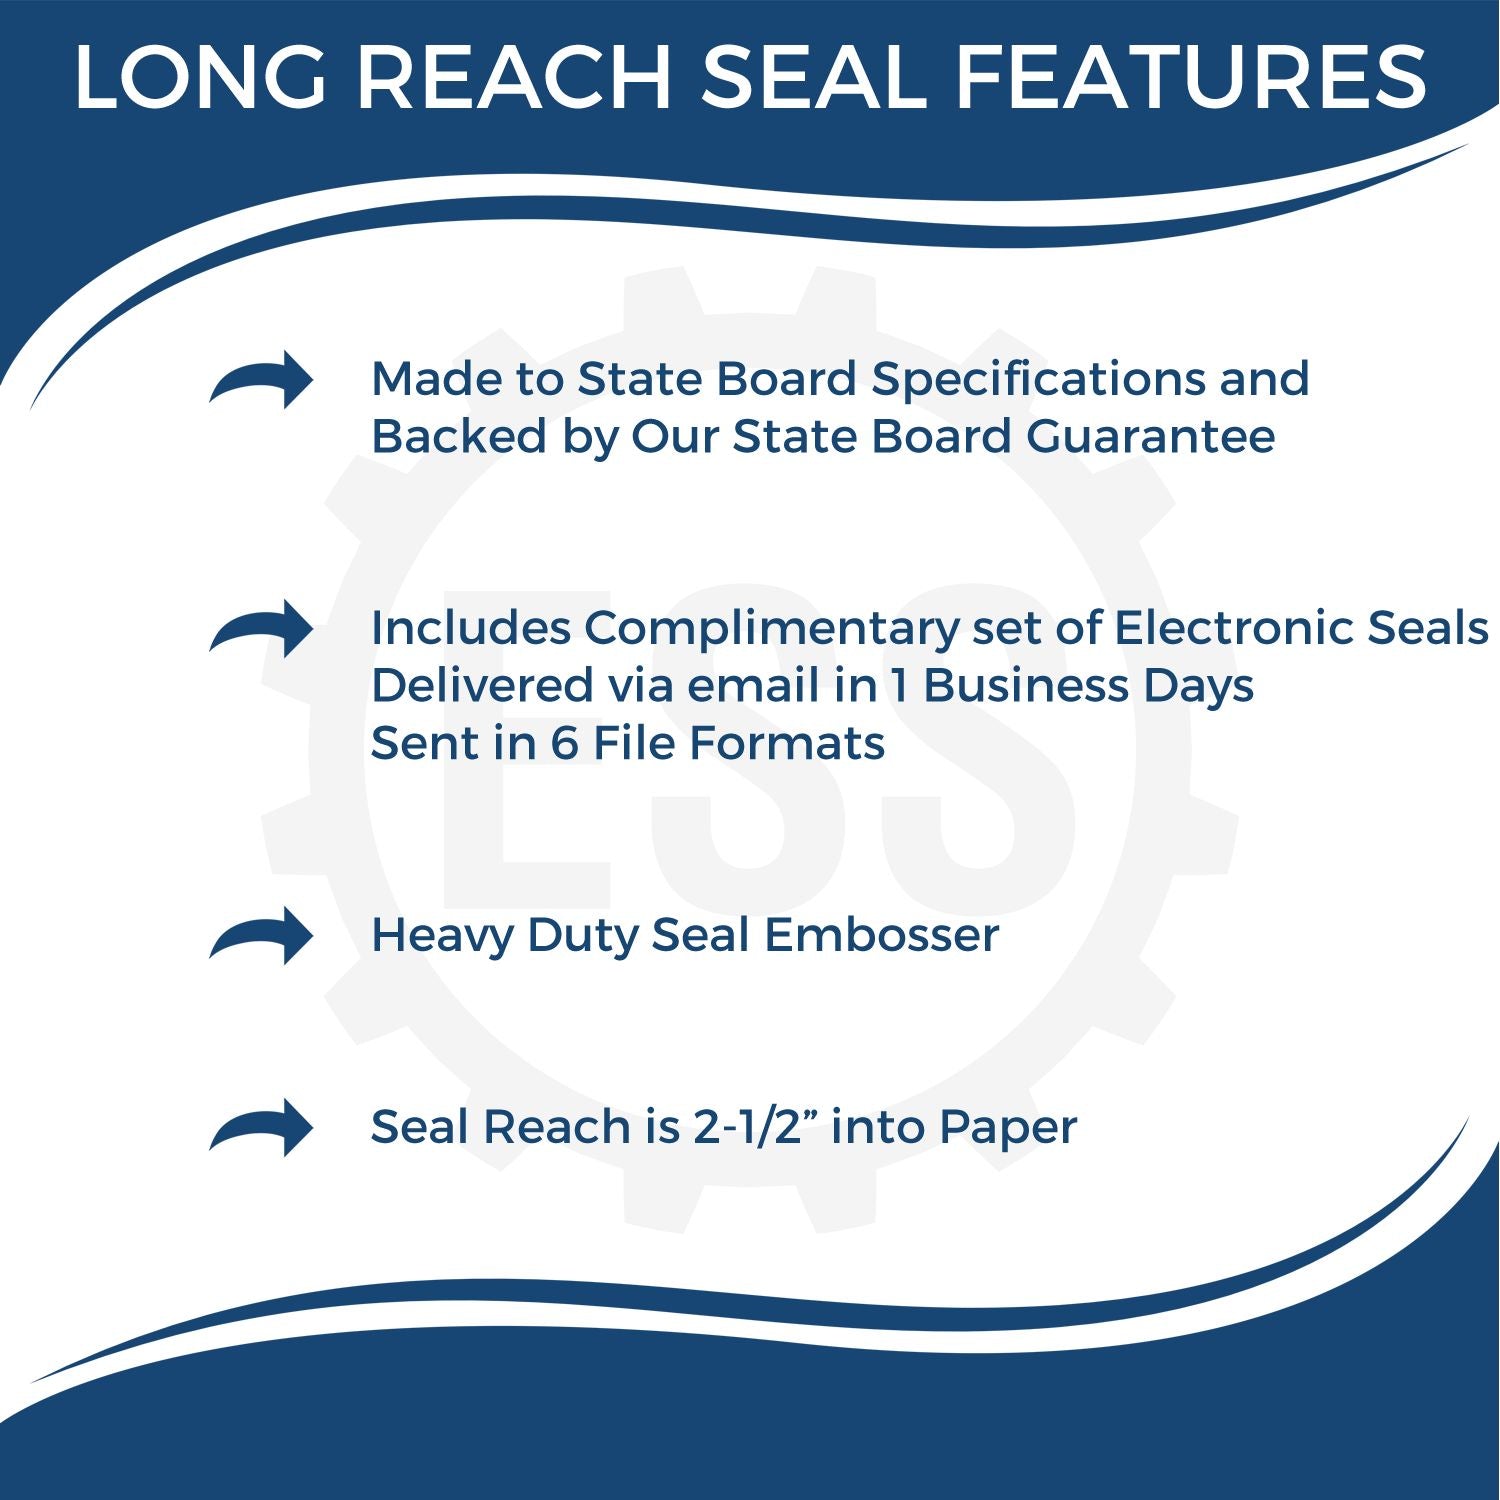 The main image for the Long Reach Alaska PE Seal depicting a sample of the imprint and electronic files